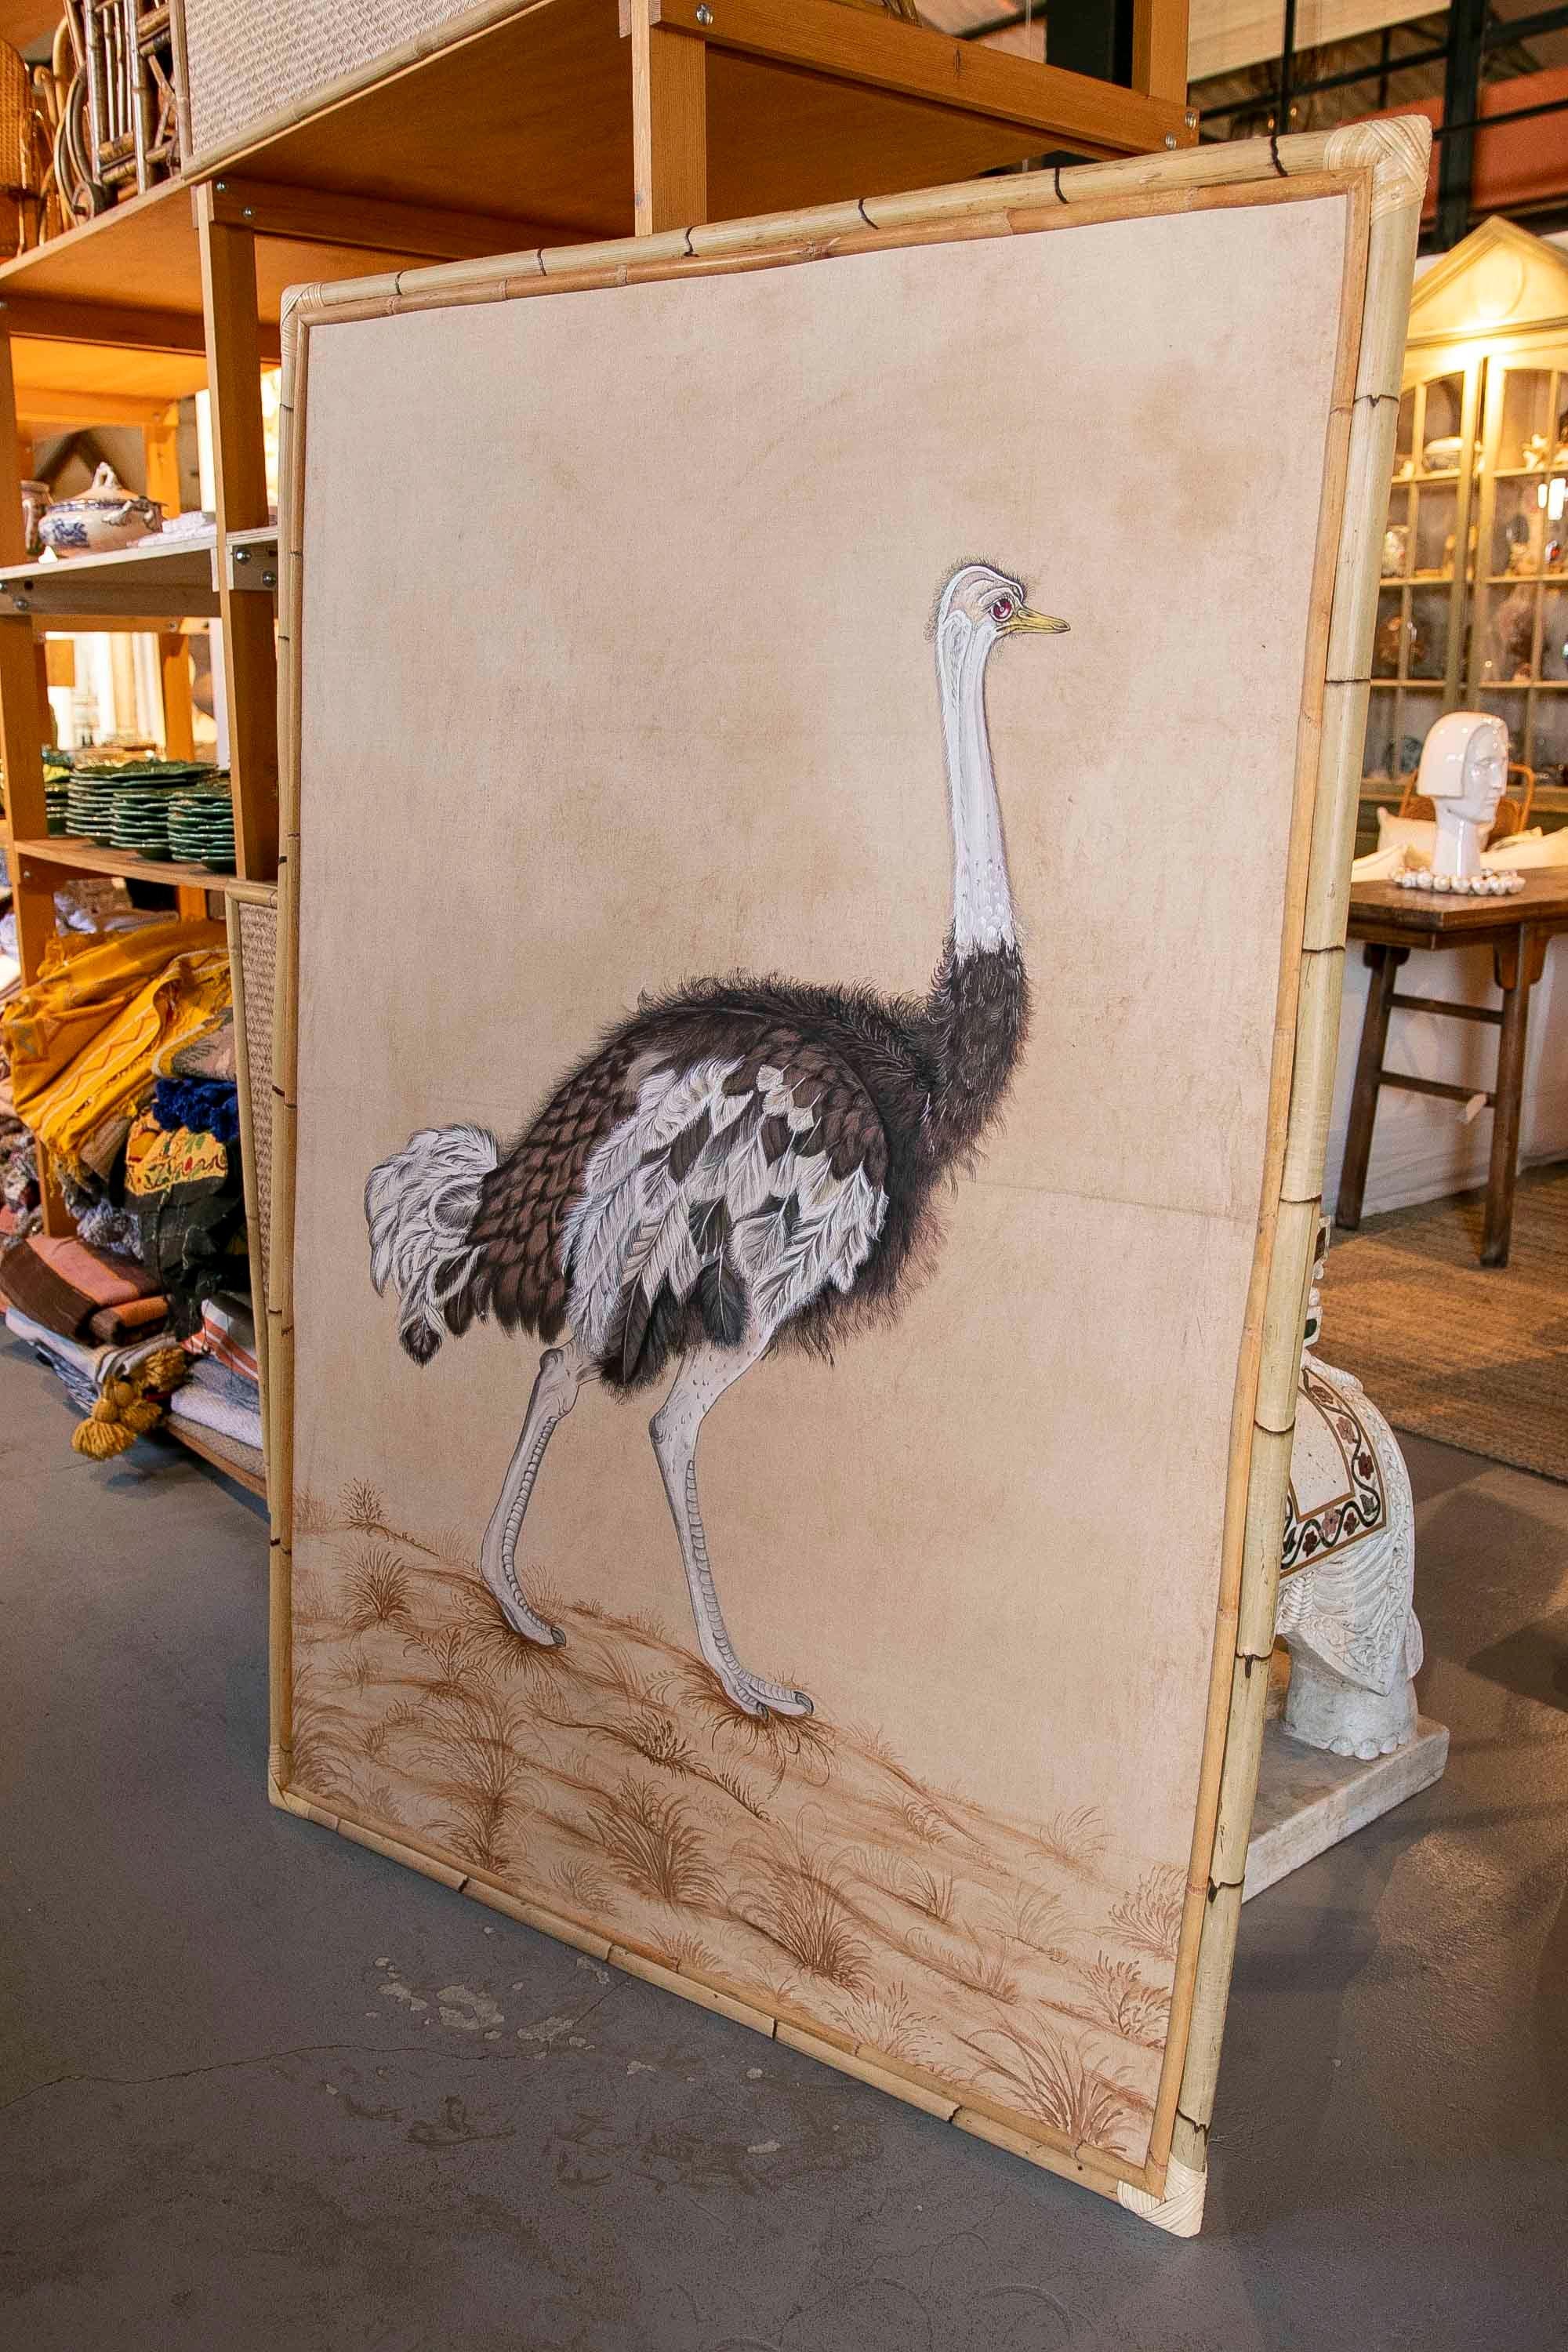 1970s Ostrich Picture Painted on Canvas and Framed in Bamboo.